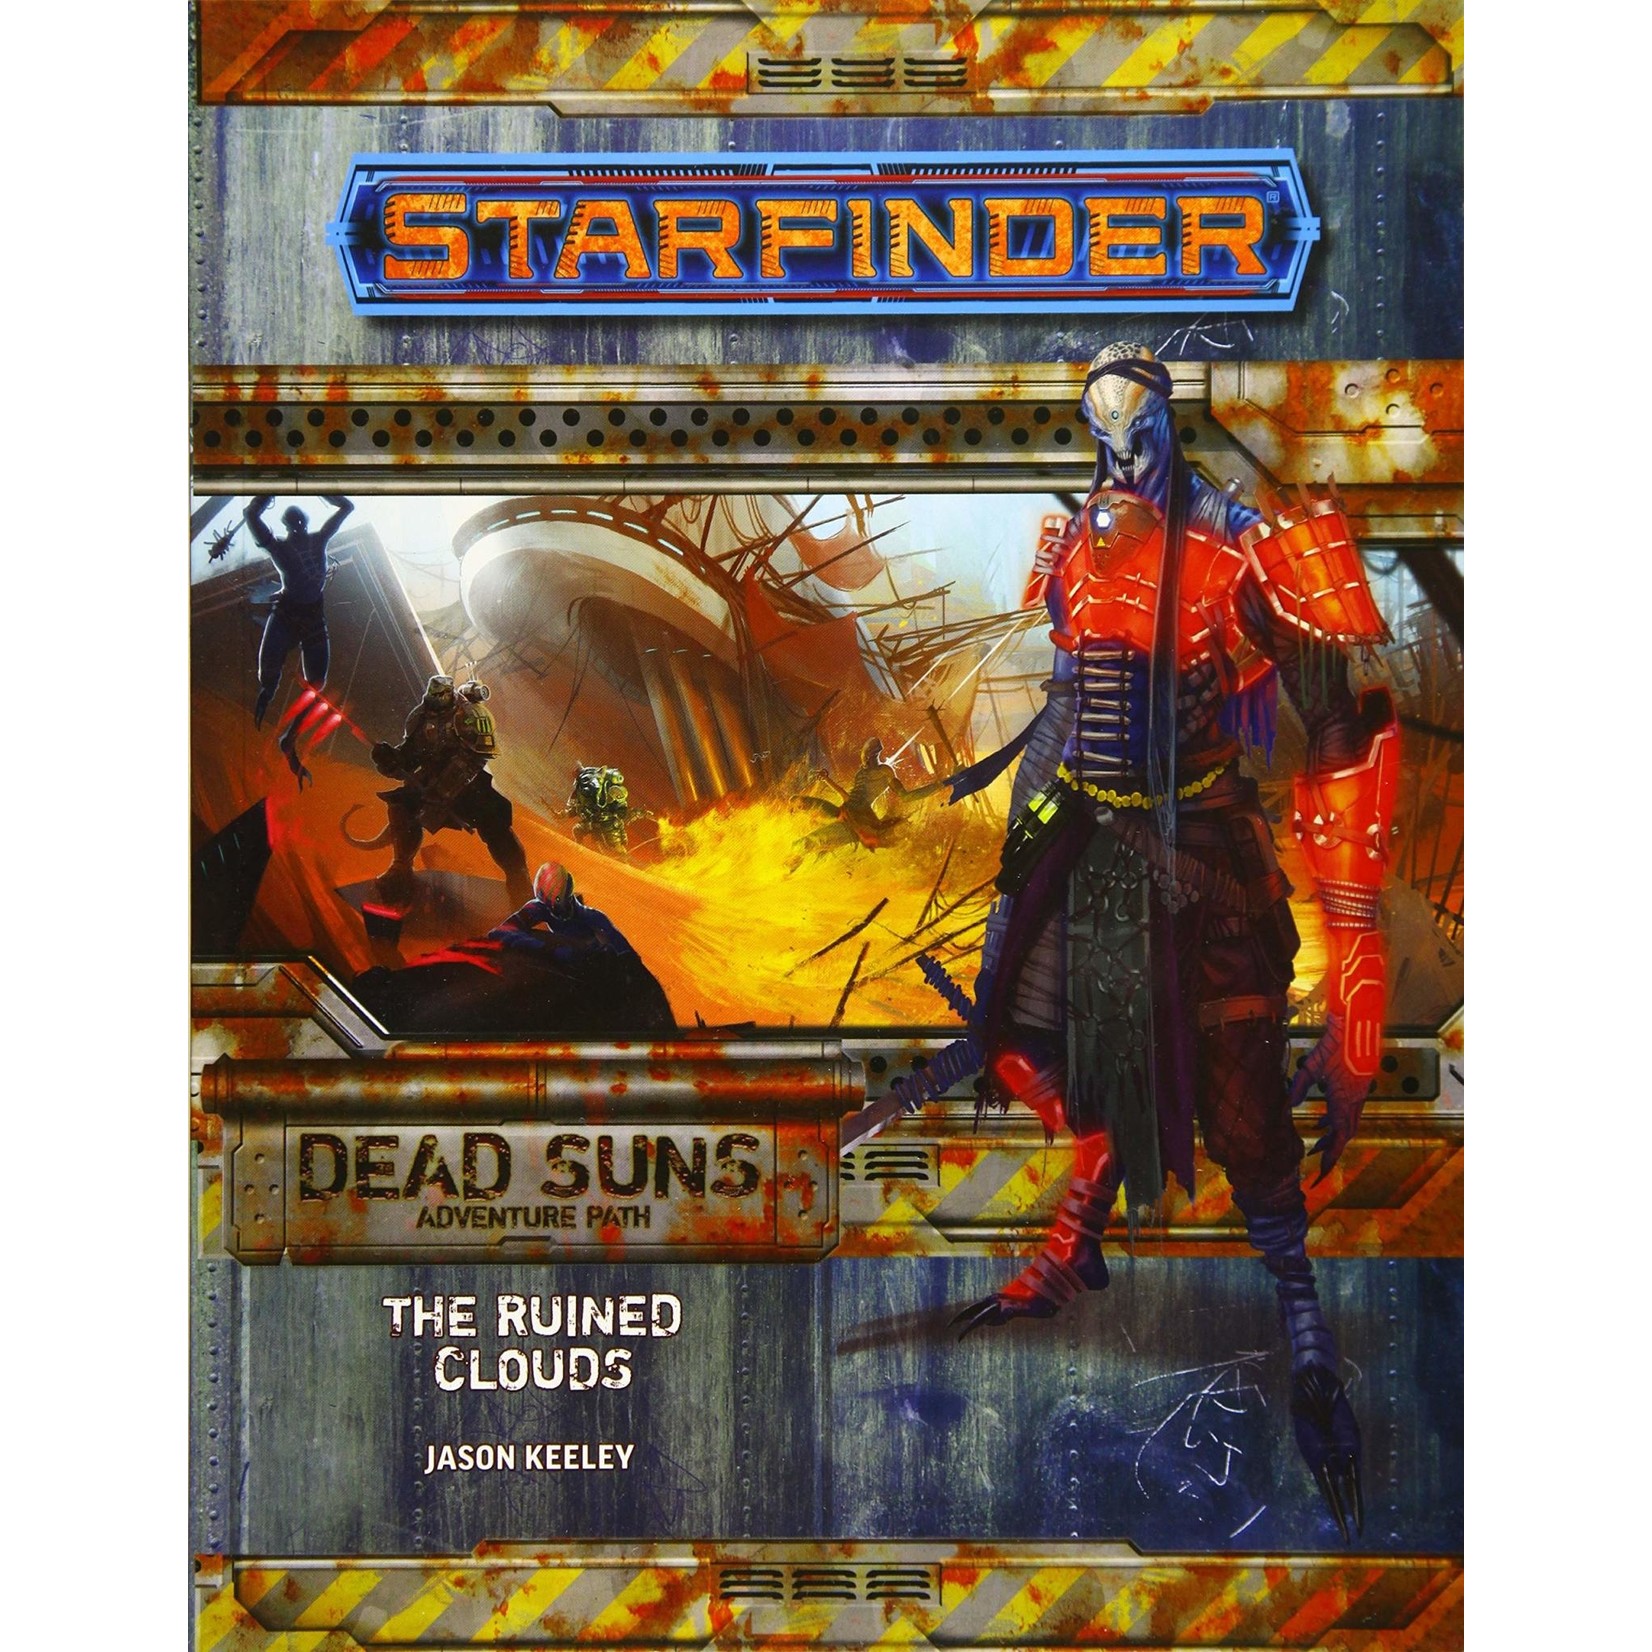 Paizo Starfinder RPG: Adventure Path - Dead Suns prt 4 - The Ruined Clouds